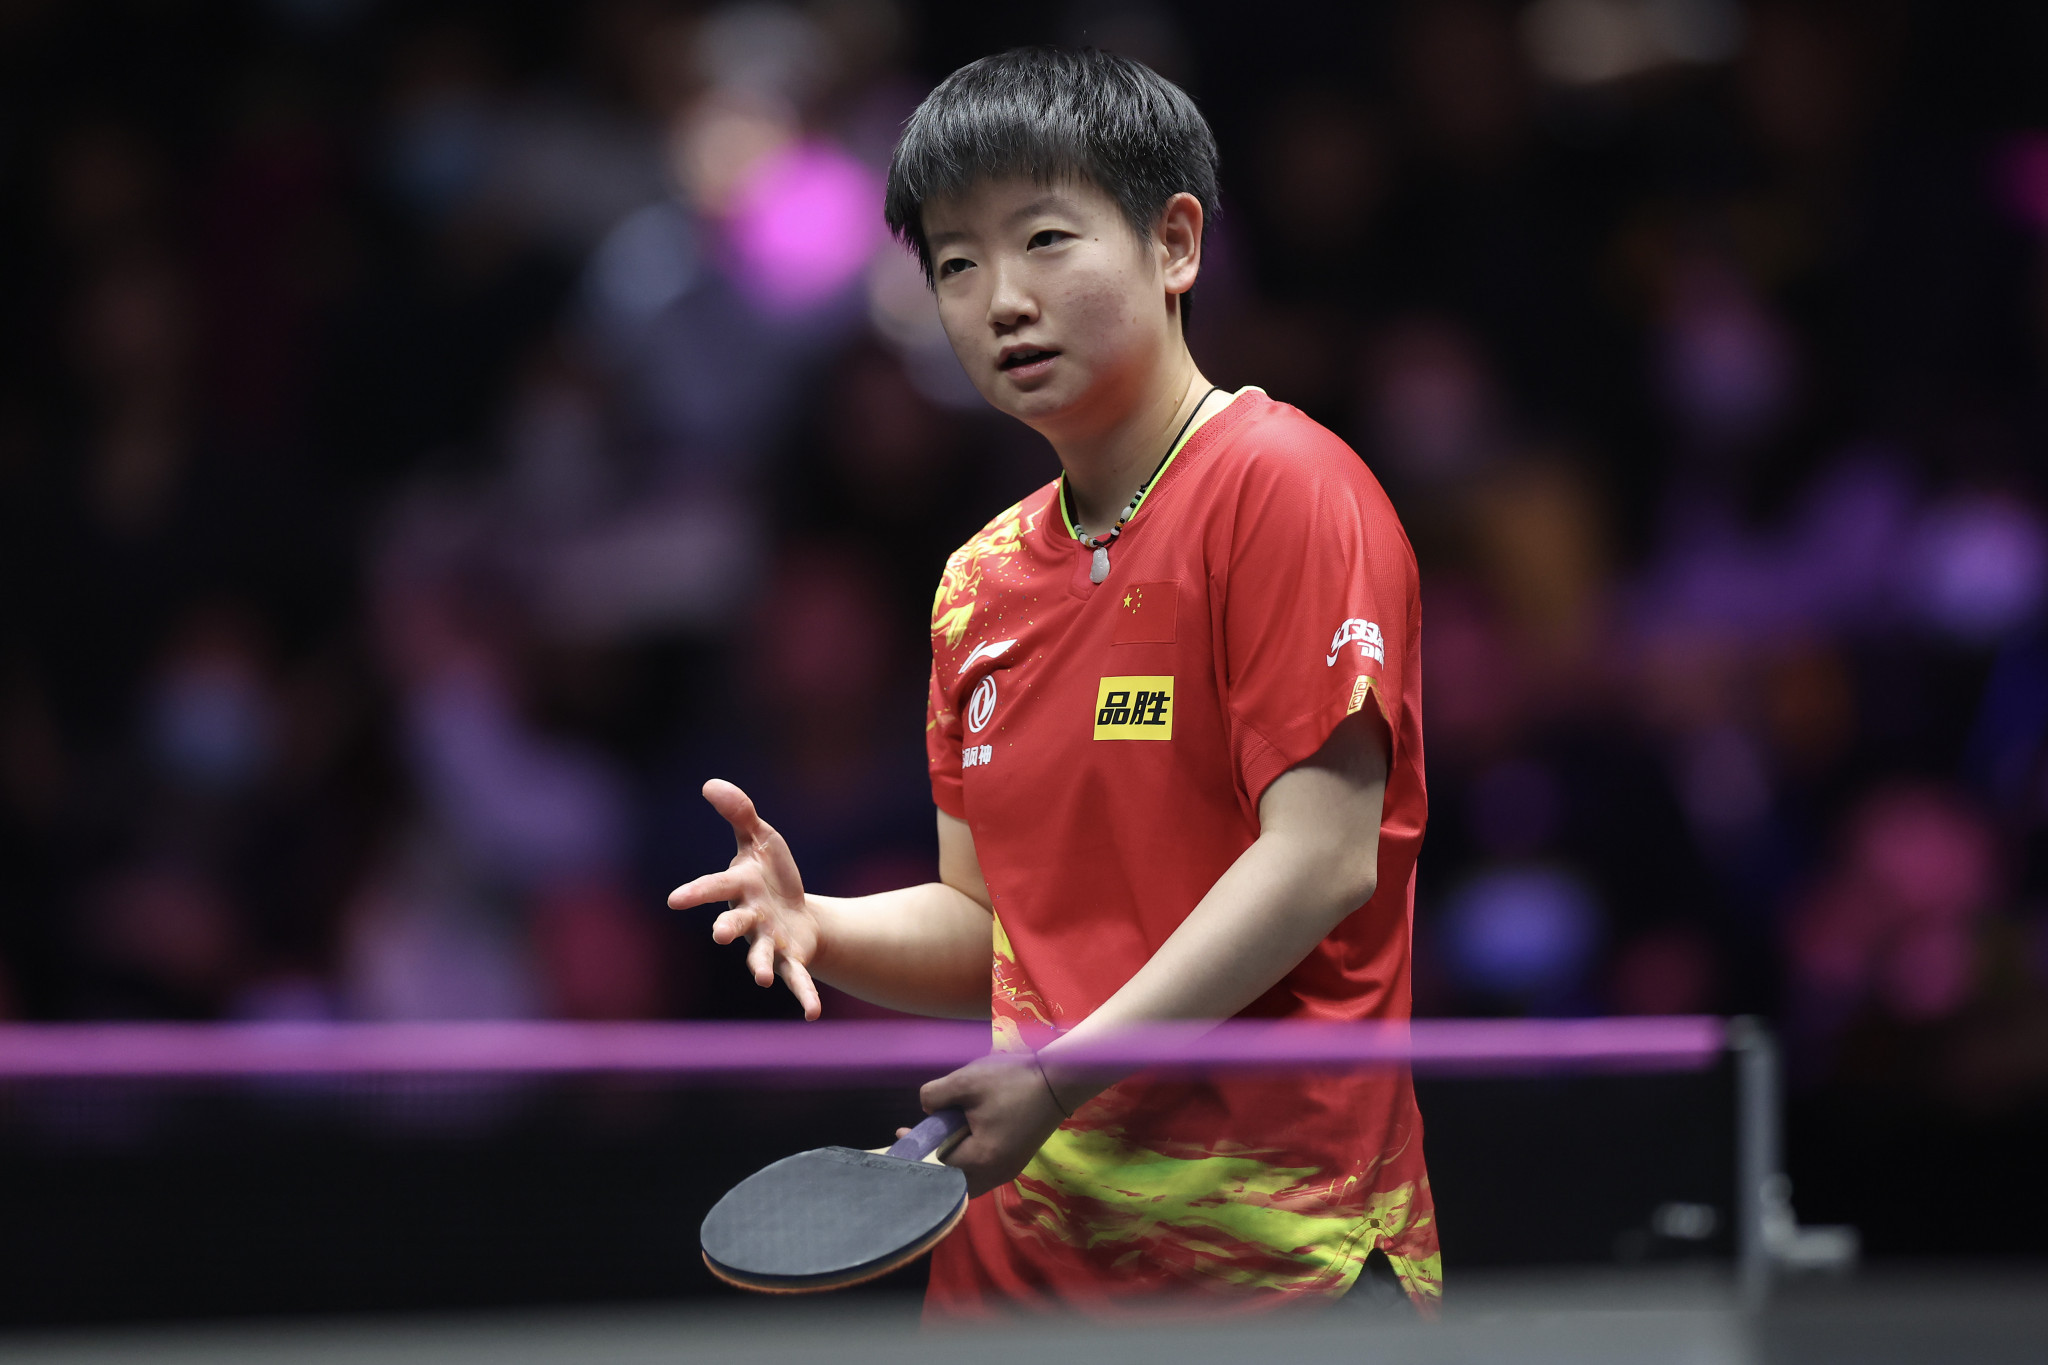 Top seeds start with routine wins at World Table Tennis Championships